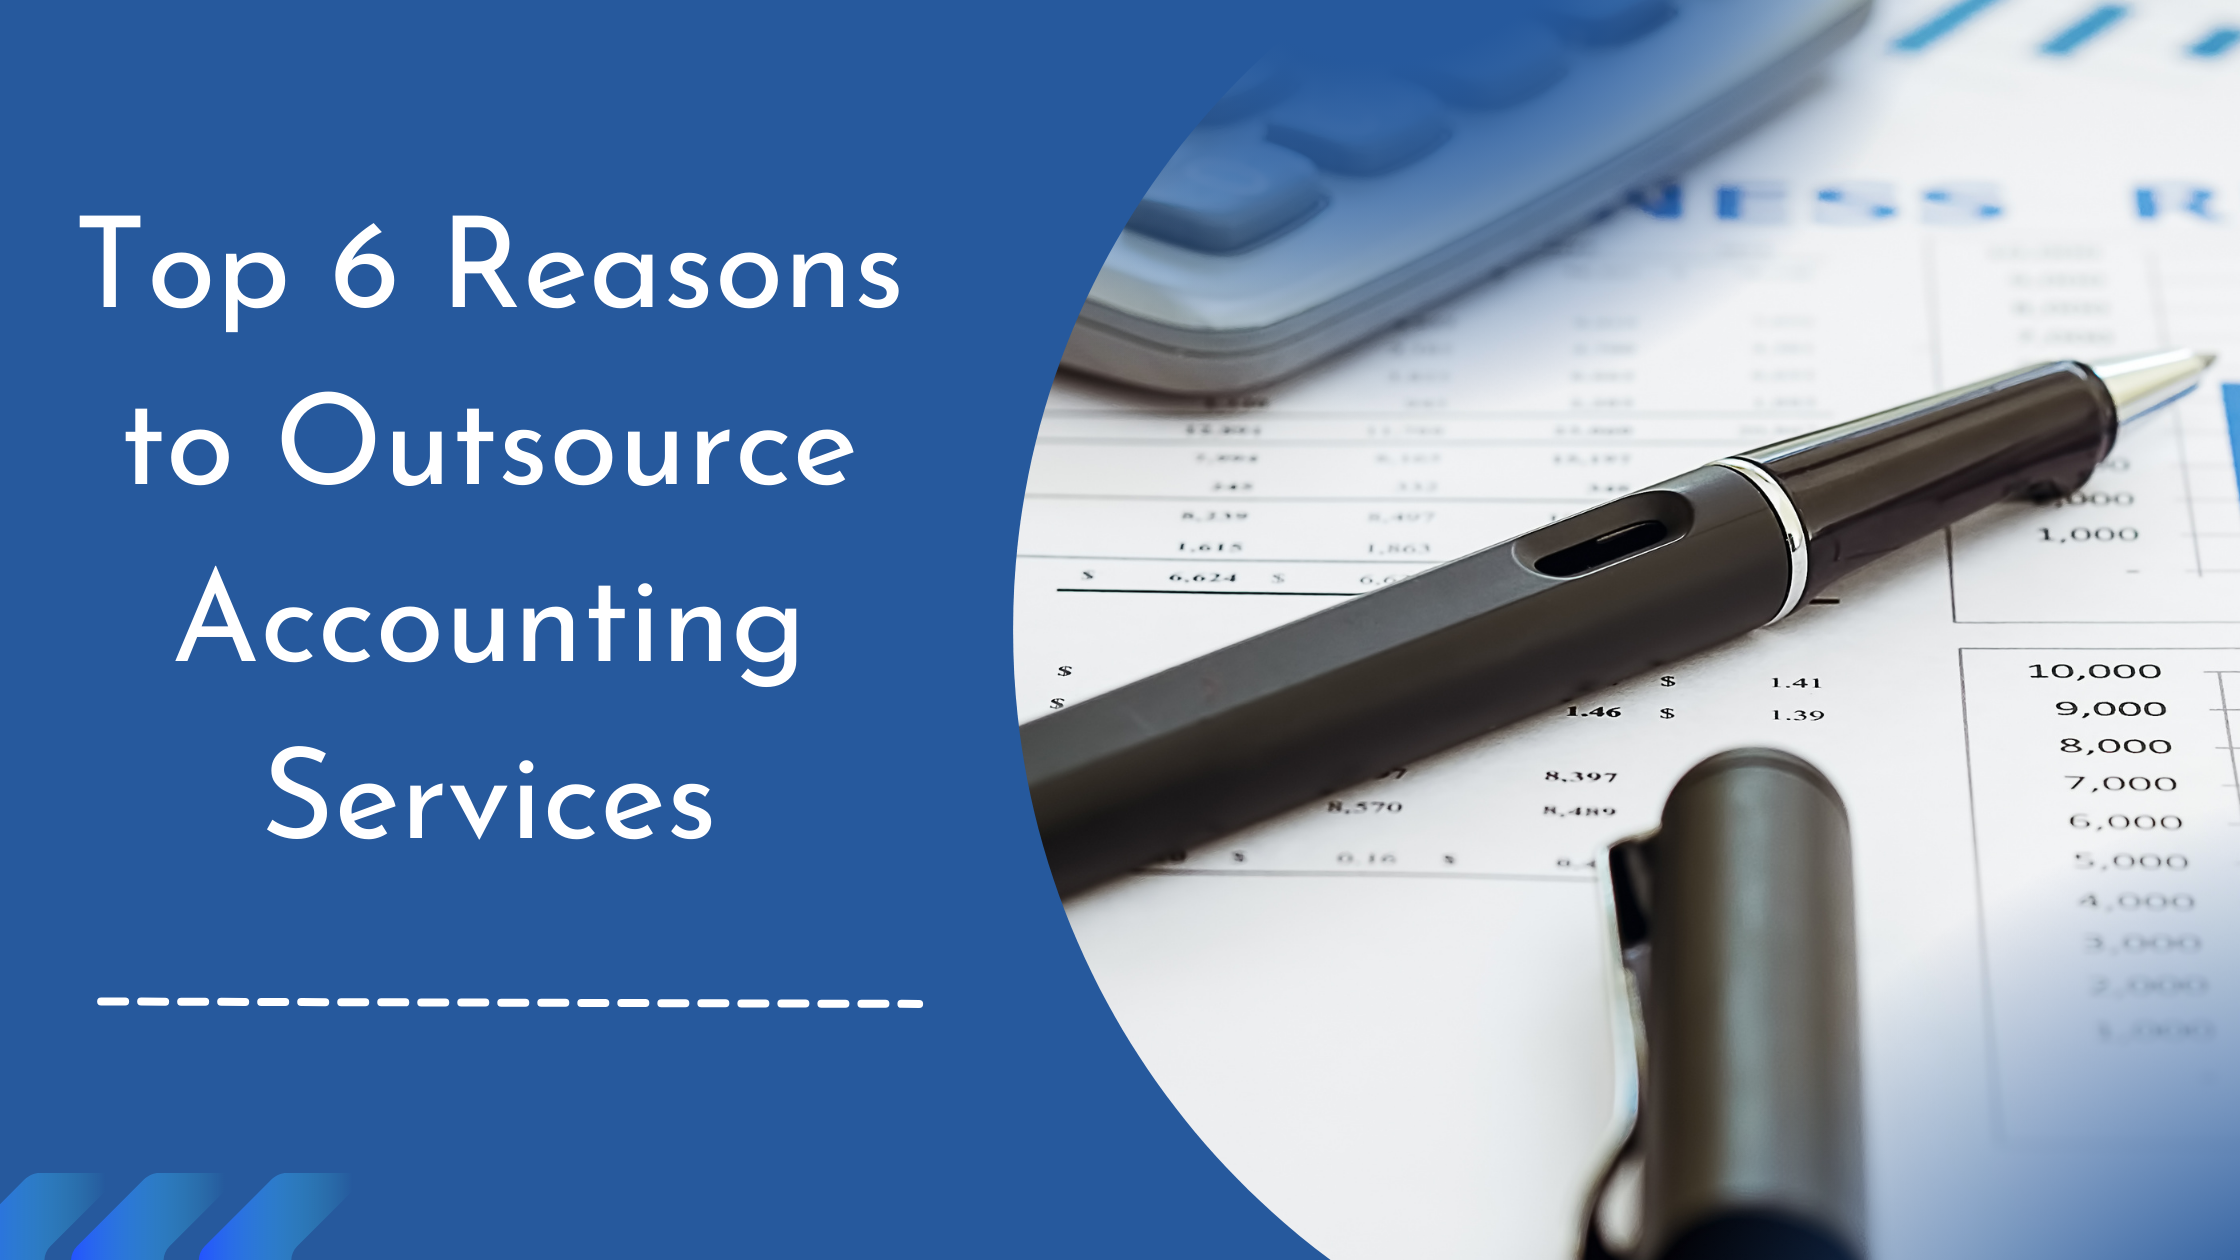 Top 6 Reasons to Outsource Accounting Services